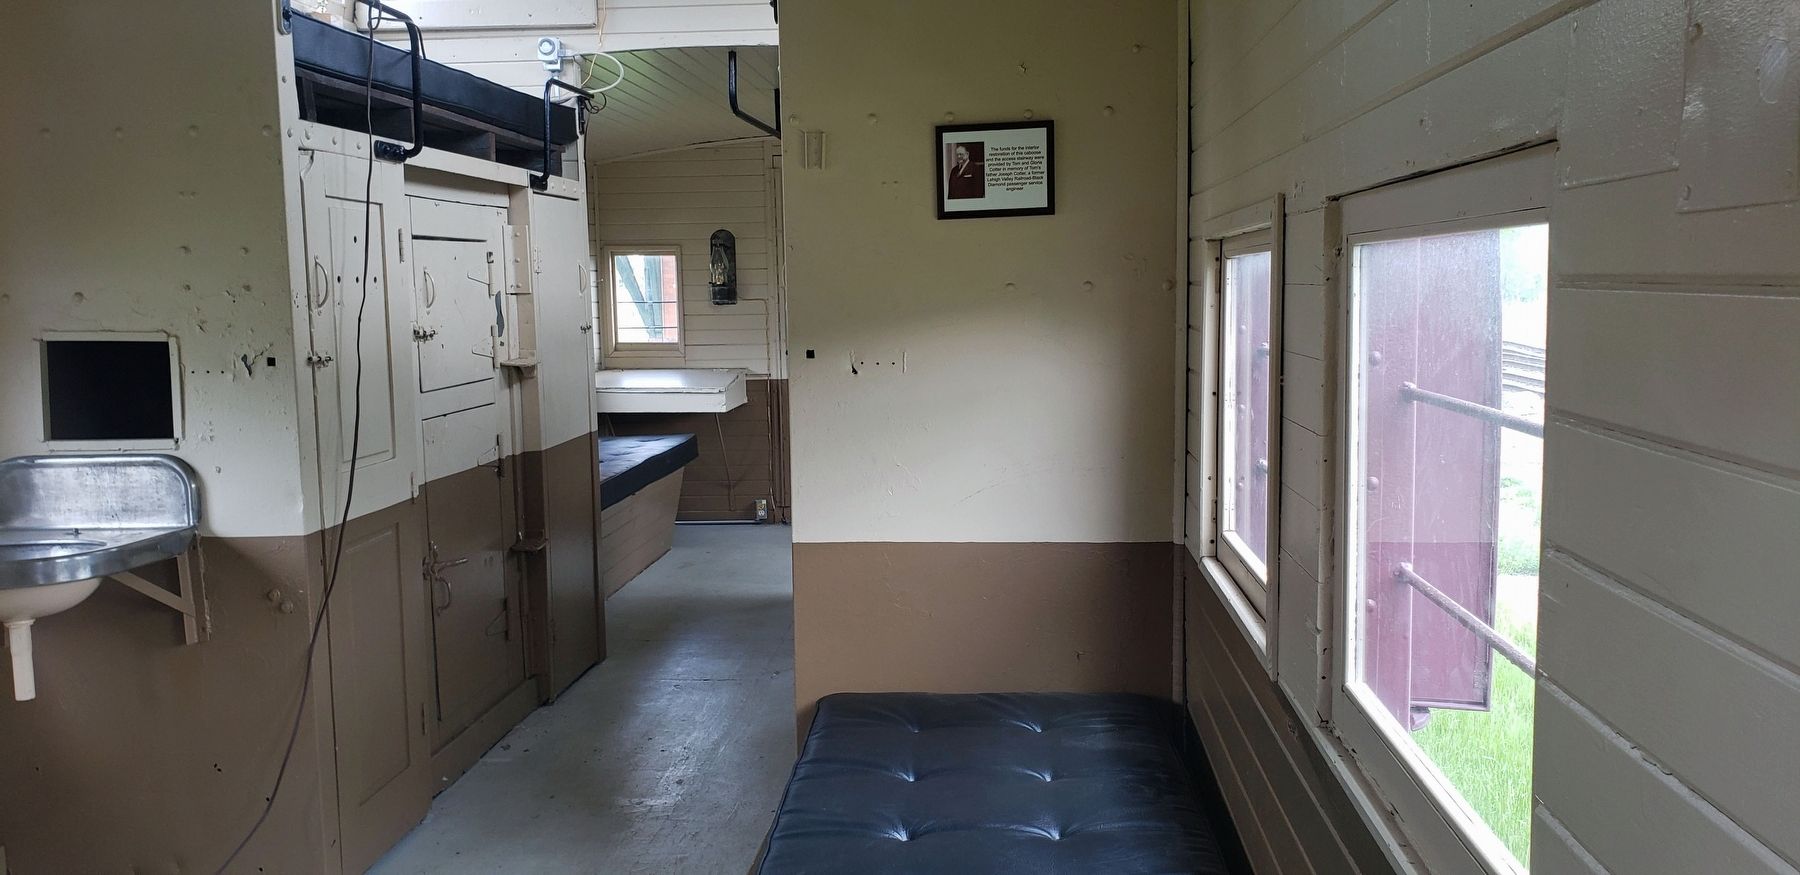 Lehigh Valley Caboose Interior image. Click for full size.